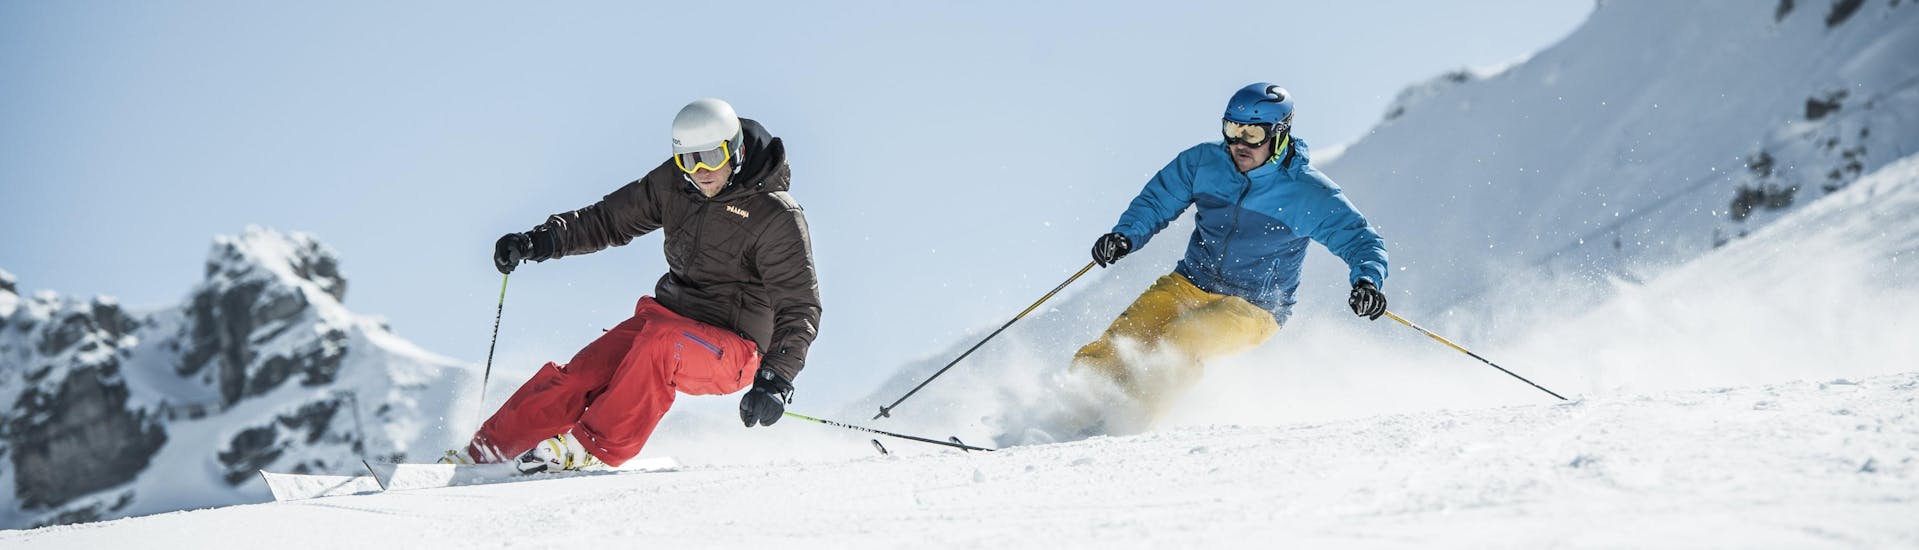 A skier practices the correct skiing technique during one of the private lessons in Valfréjus.